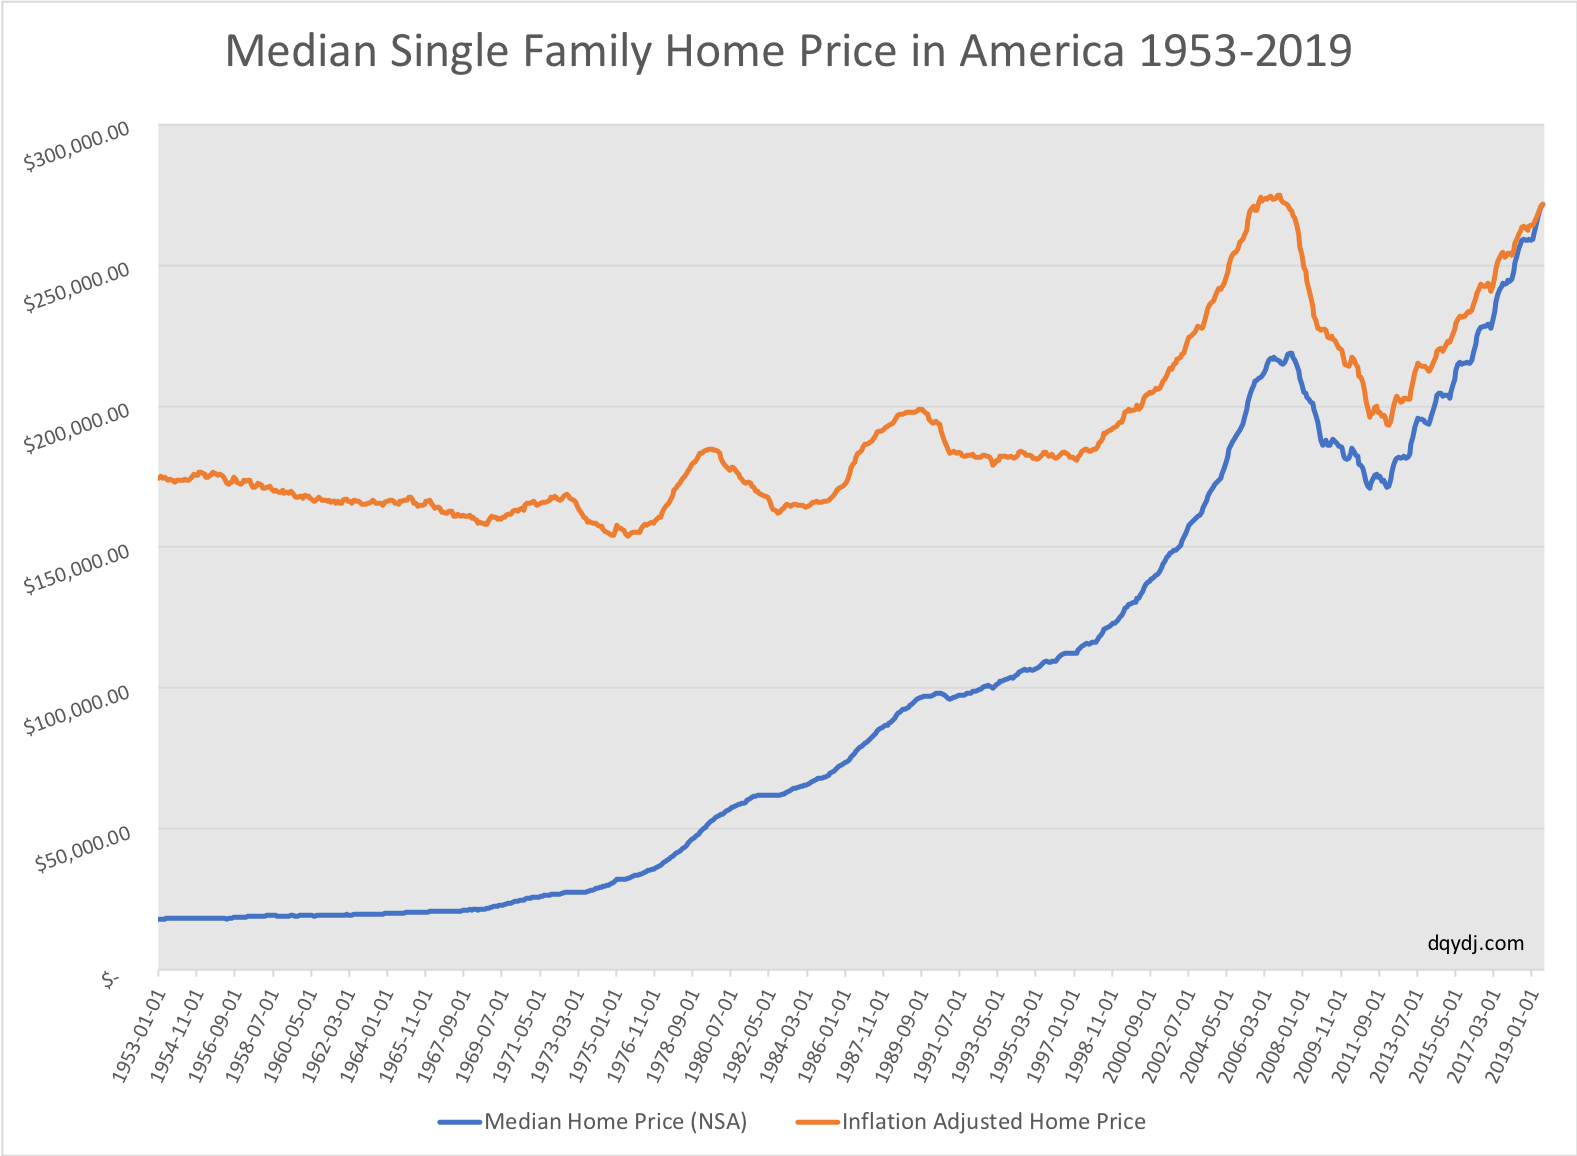 historical-home-prices-us-monthly-median-from-1953-2019-dqydj